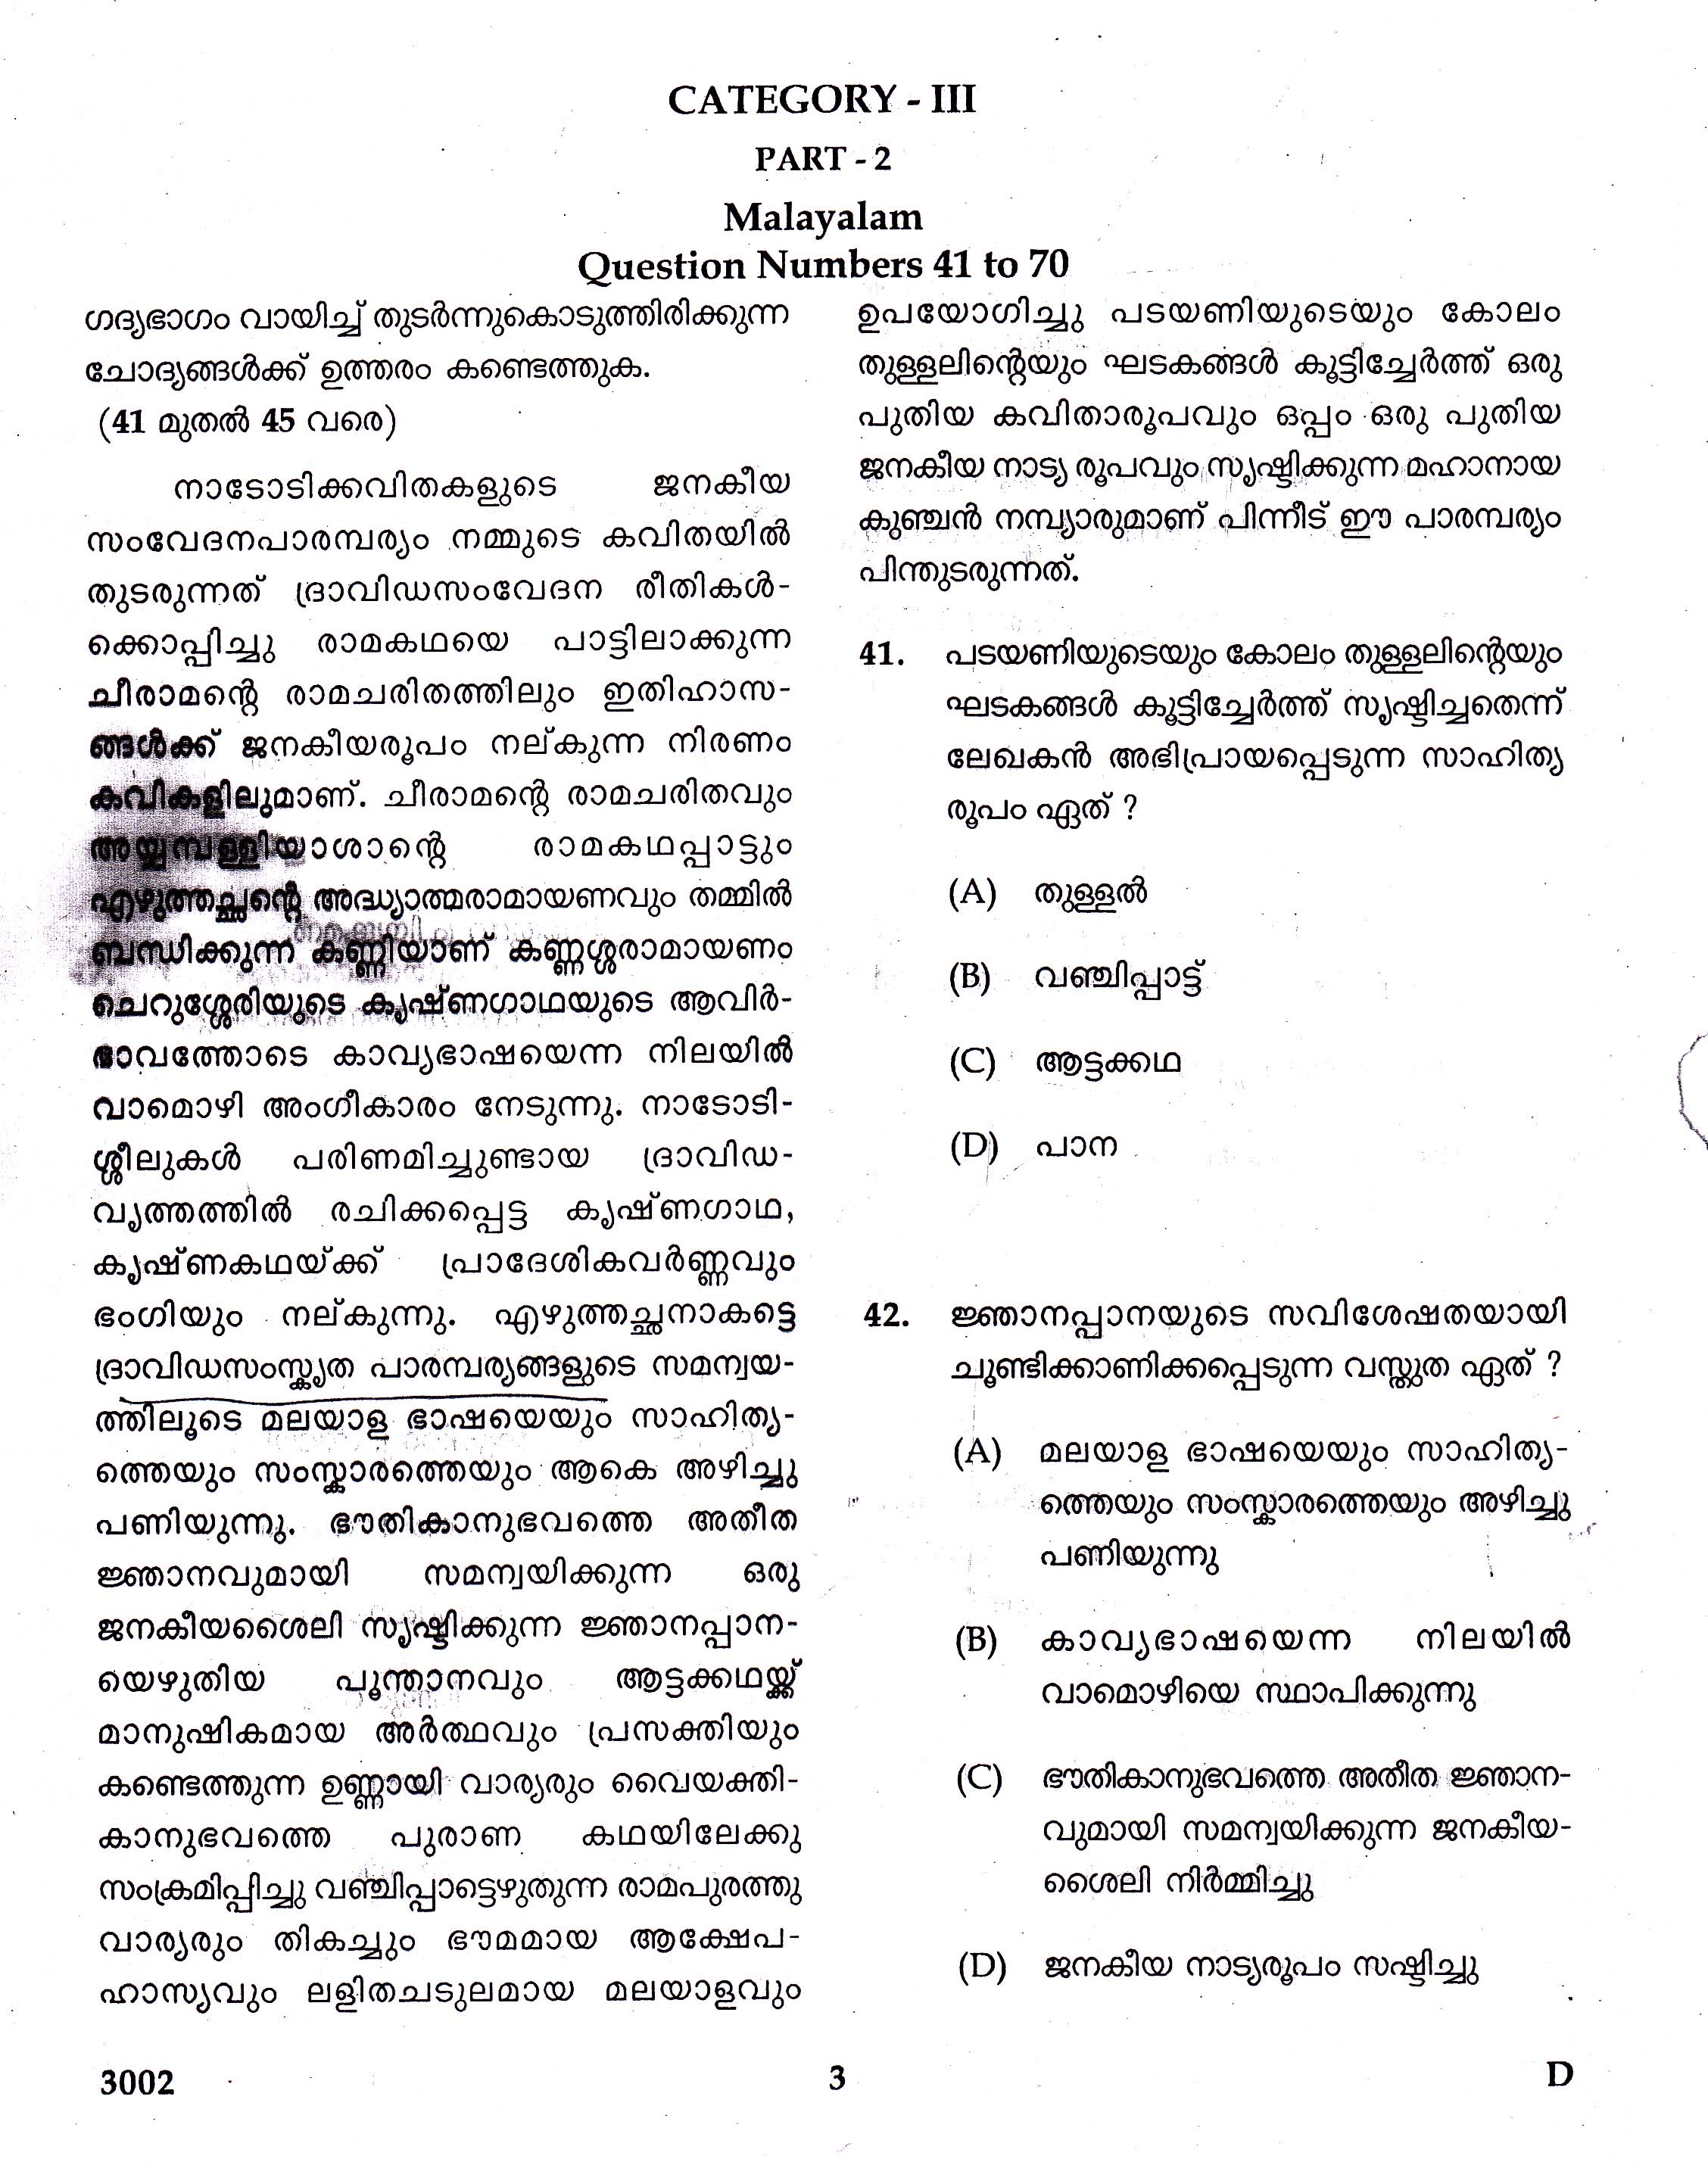 KTET Category III Part 2 Malayalam Question Paper with Answers 2017 1